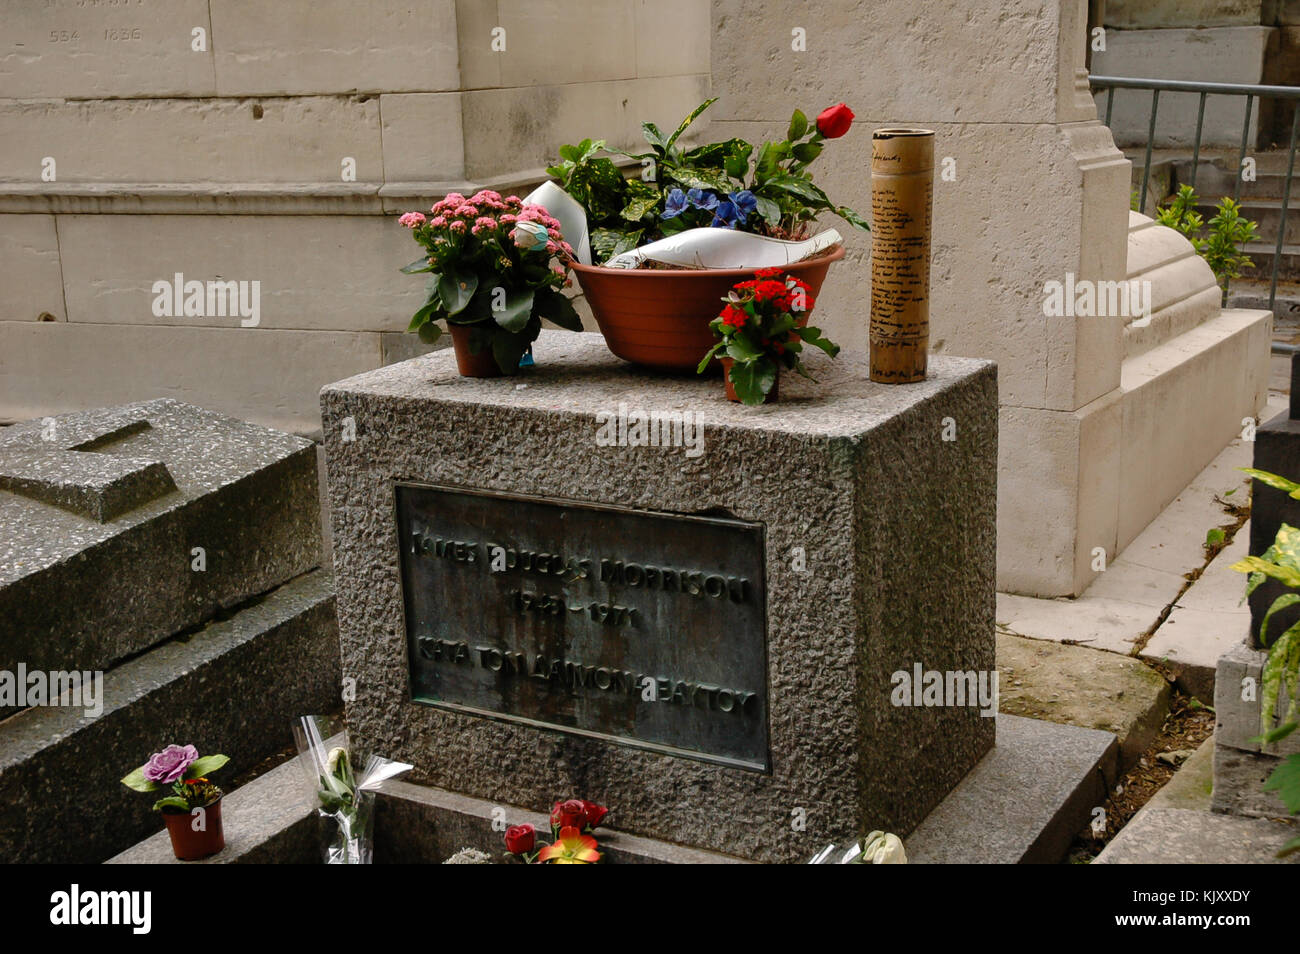 Tomb of the legendary Jim Morrison - The Doors singer and a poet buried in Père Lachaise Cemetery in Paris, France Stock Photo